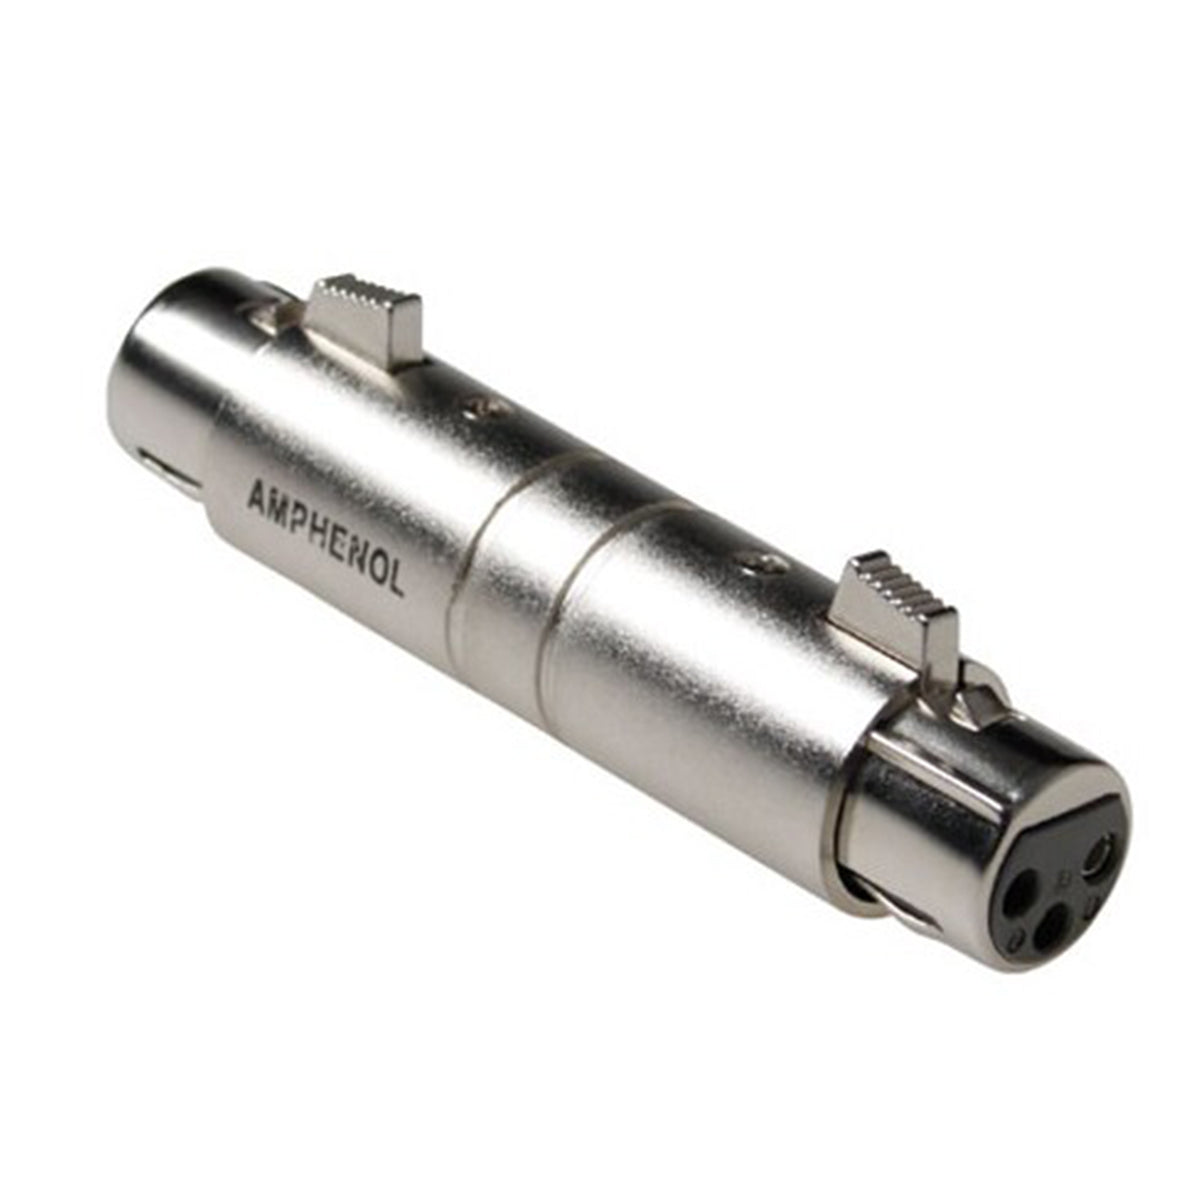 Amphenol XLR 3pin female to 5pin male adapter Pre-wired Metal